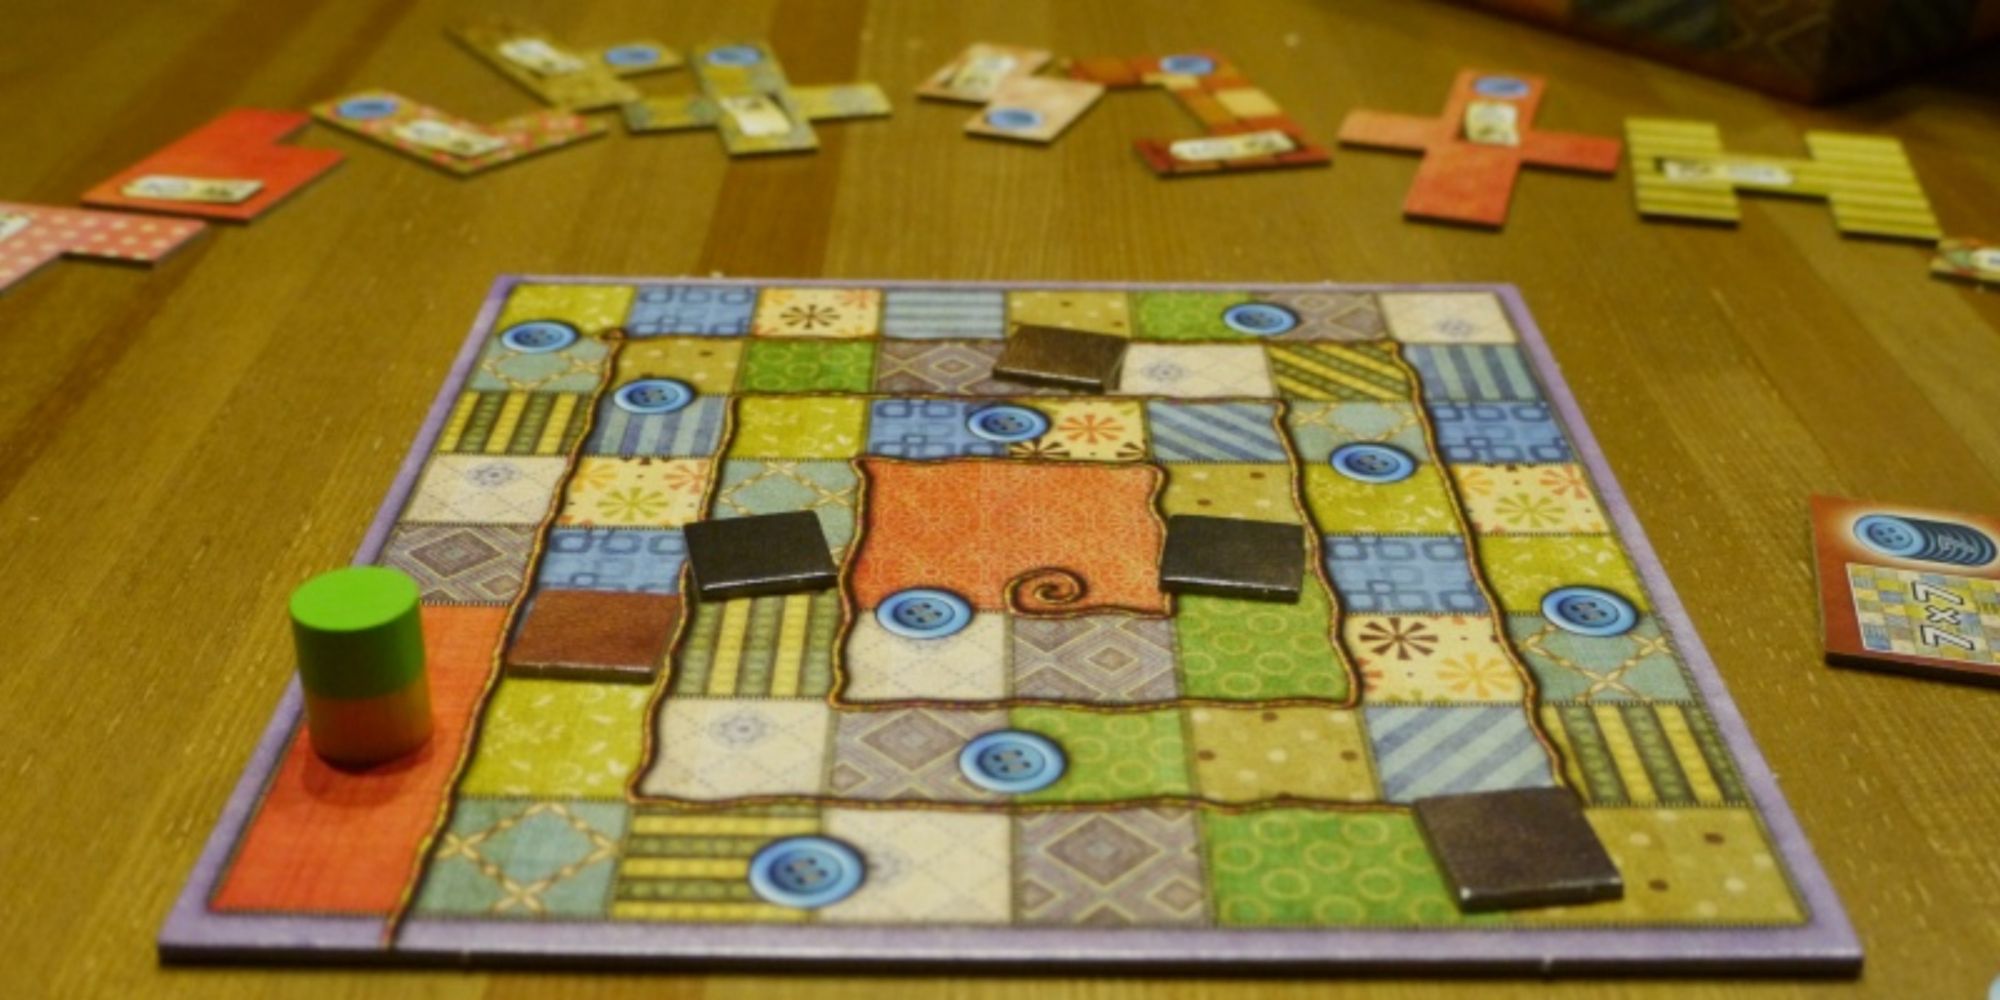 Patchwork board game